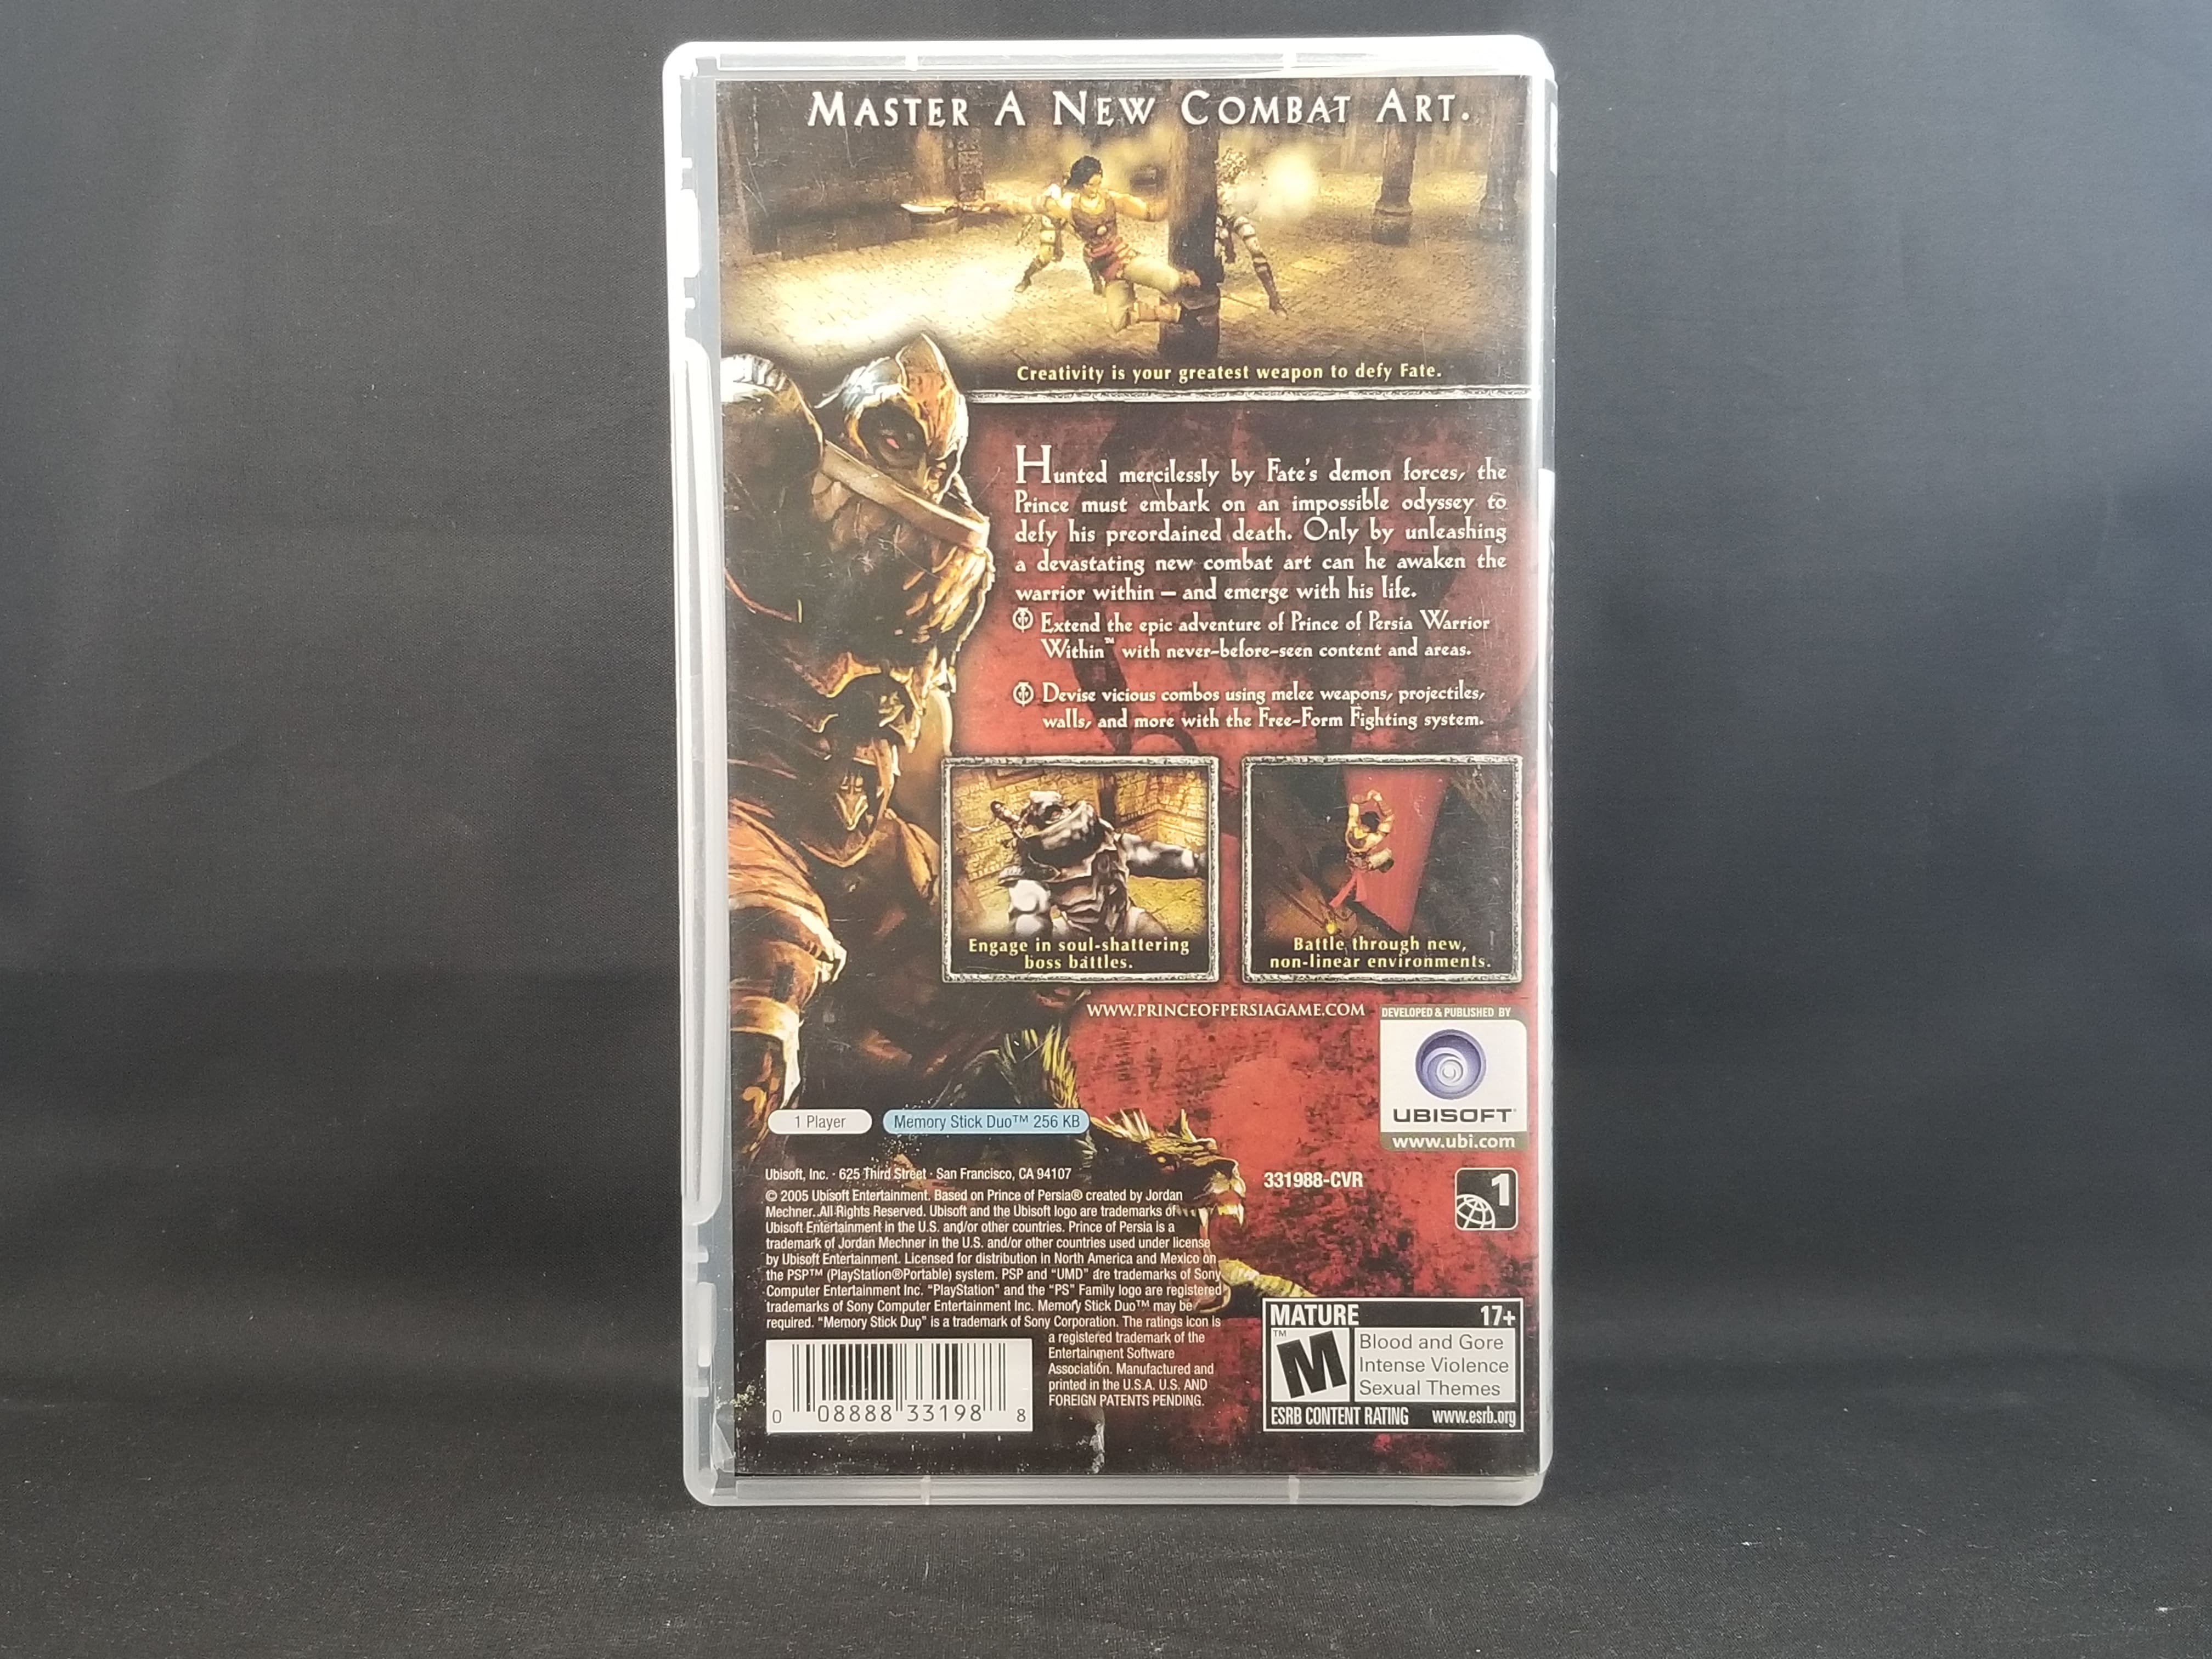 Prince Of Persia Revelations | PSP